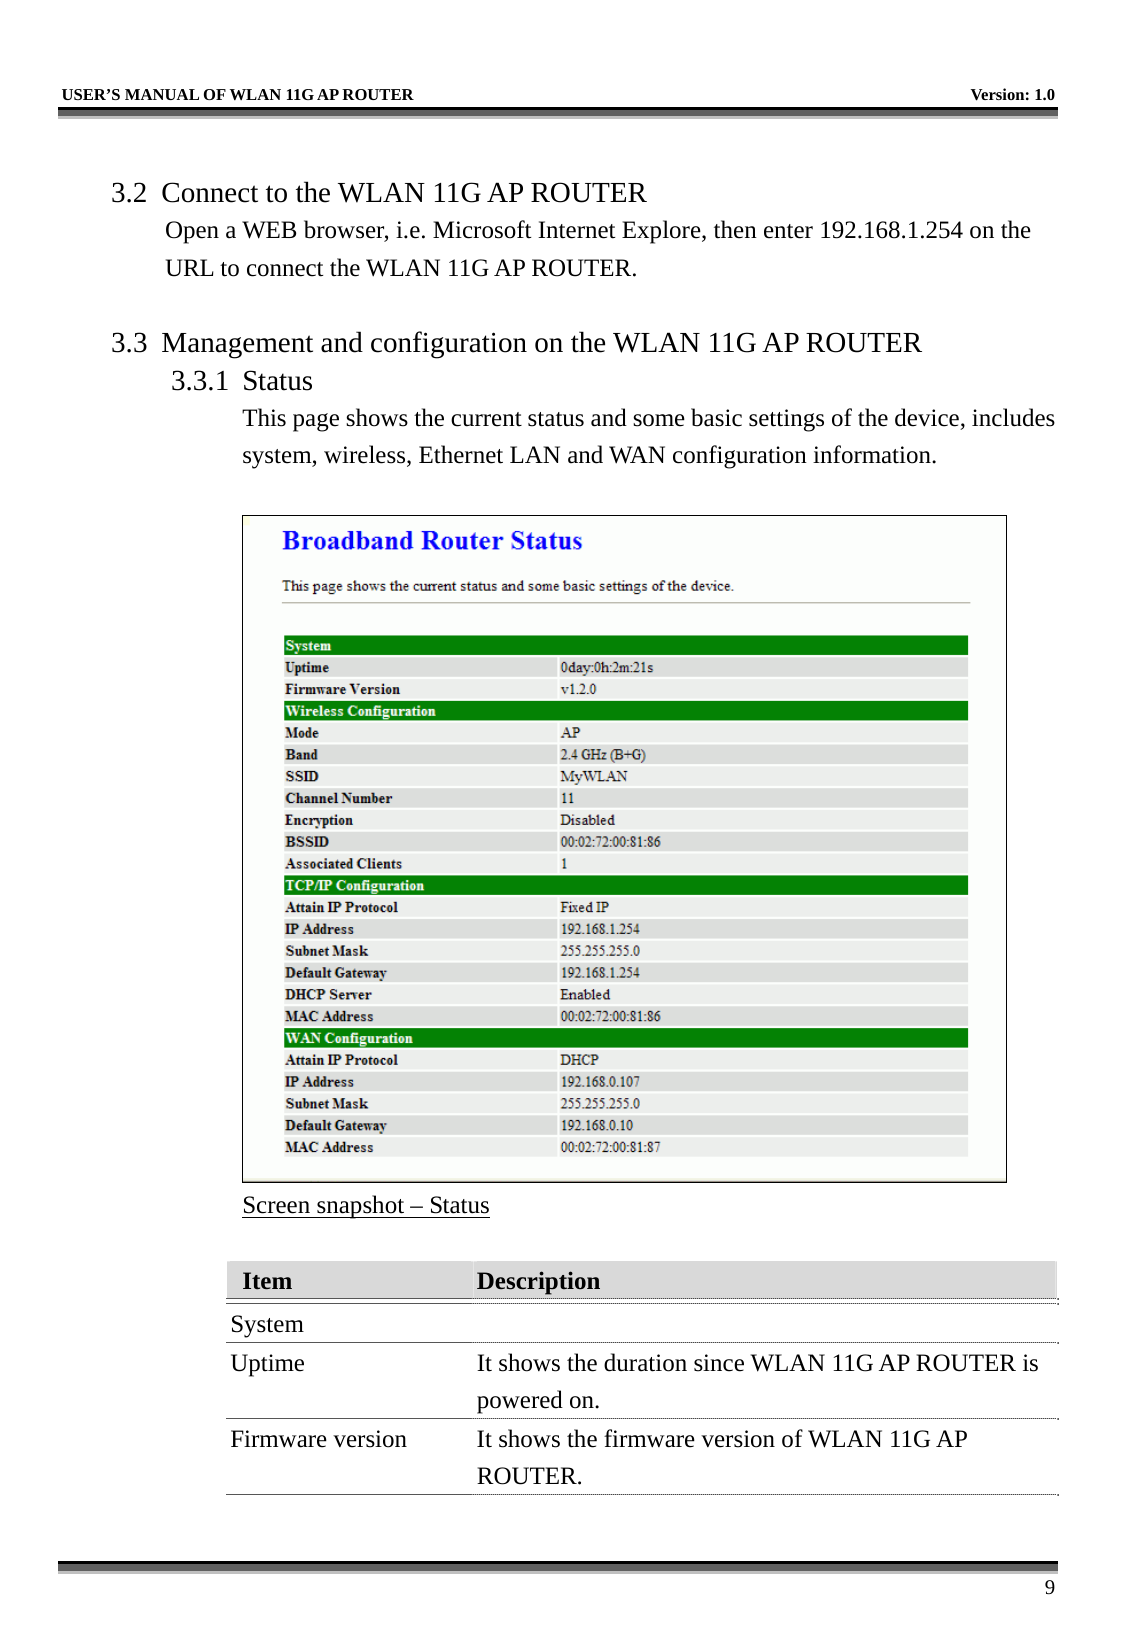   USER’S MANUAL OF WLAN 11G AP ROUTER    Version: 1.0     9  3.2  Connect to the WLAN 11G AP ROUTER Open a WEB browser, i.e. Microsoft Internet Explore, then enter 192.168.1.254 on the URL to connect the WLAN 11G AP ROUTER.  3.3  Management and configuration on the WLAN 11G AP ROUTER 3.3.1 Status This page shows the current status and some basic settings of the device, includes system, wireless, Ethernet LAN and WAN configuration information.   Screen snapshot – Status  Item  Description   System  Uptime  It shows the duration since WLAN 11G AP ROUTER is powered on.   Firmware version  It shows the firmware version of WLAN 11G AP ROUTER.   